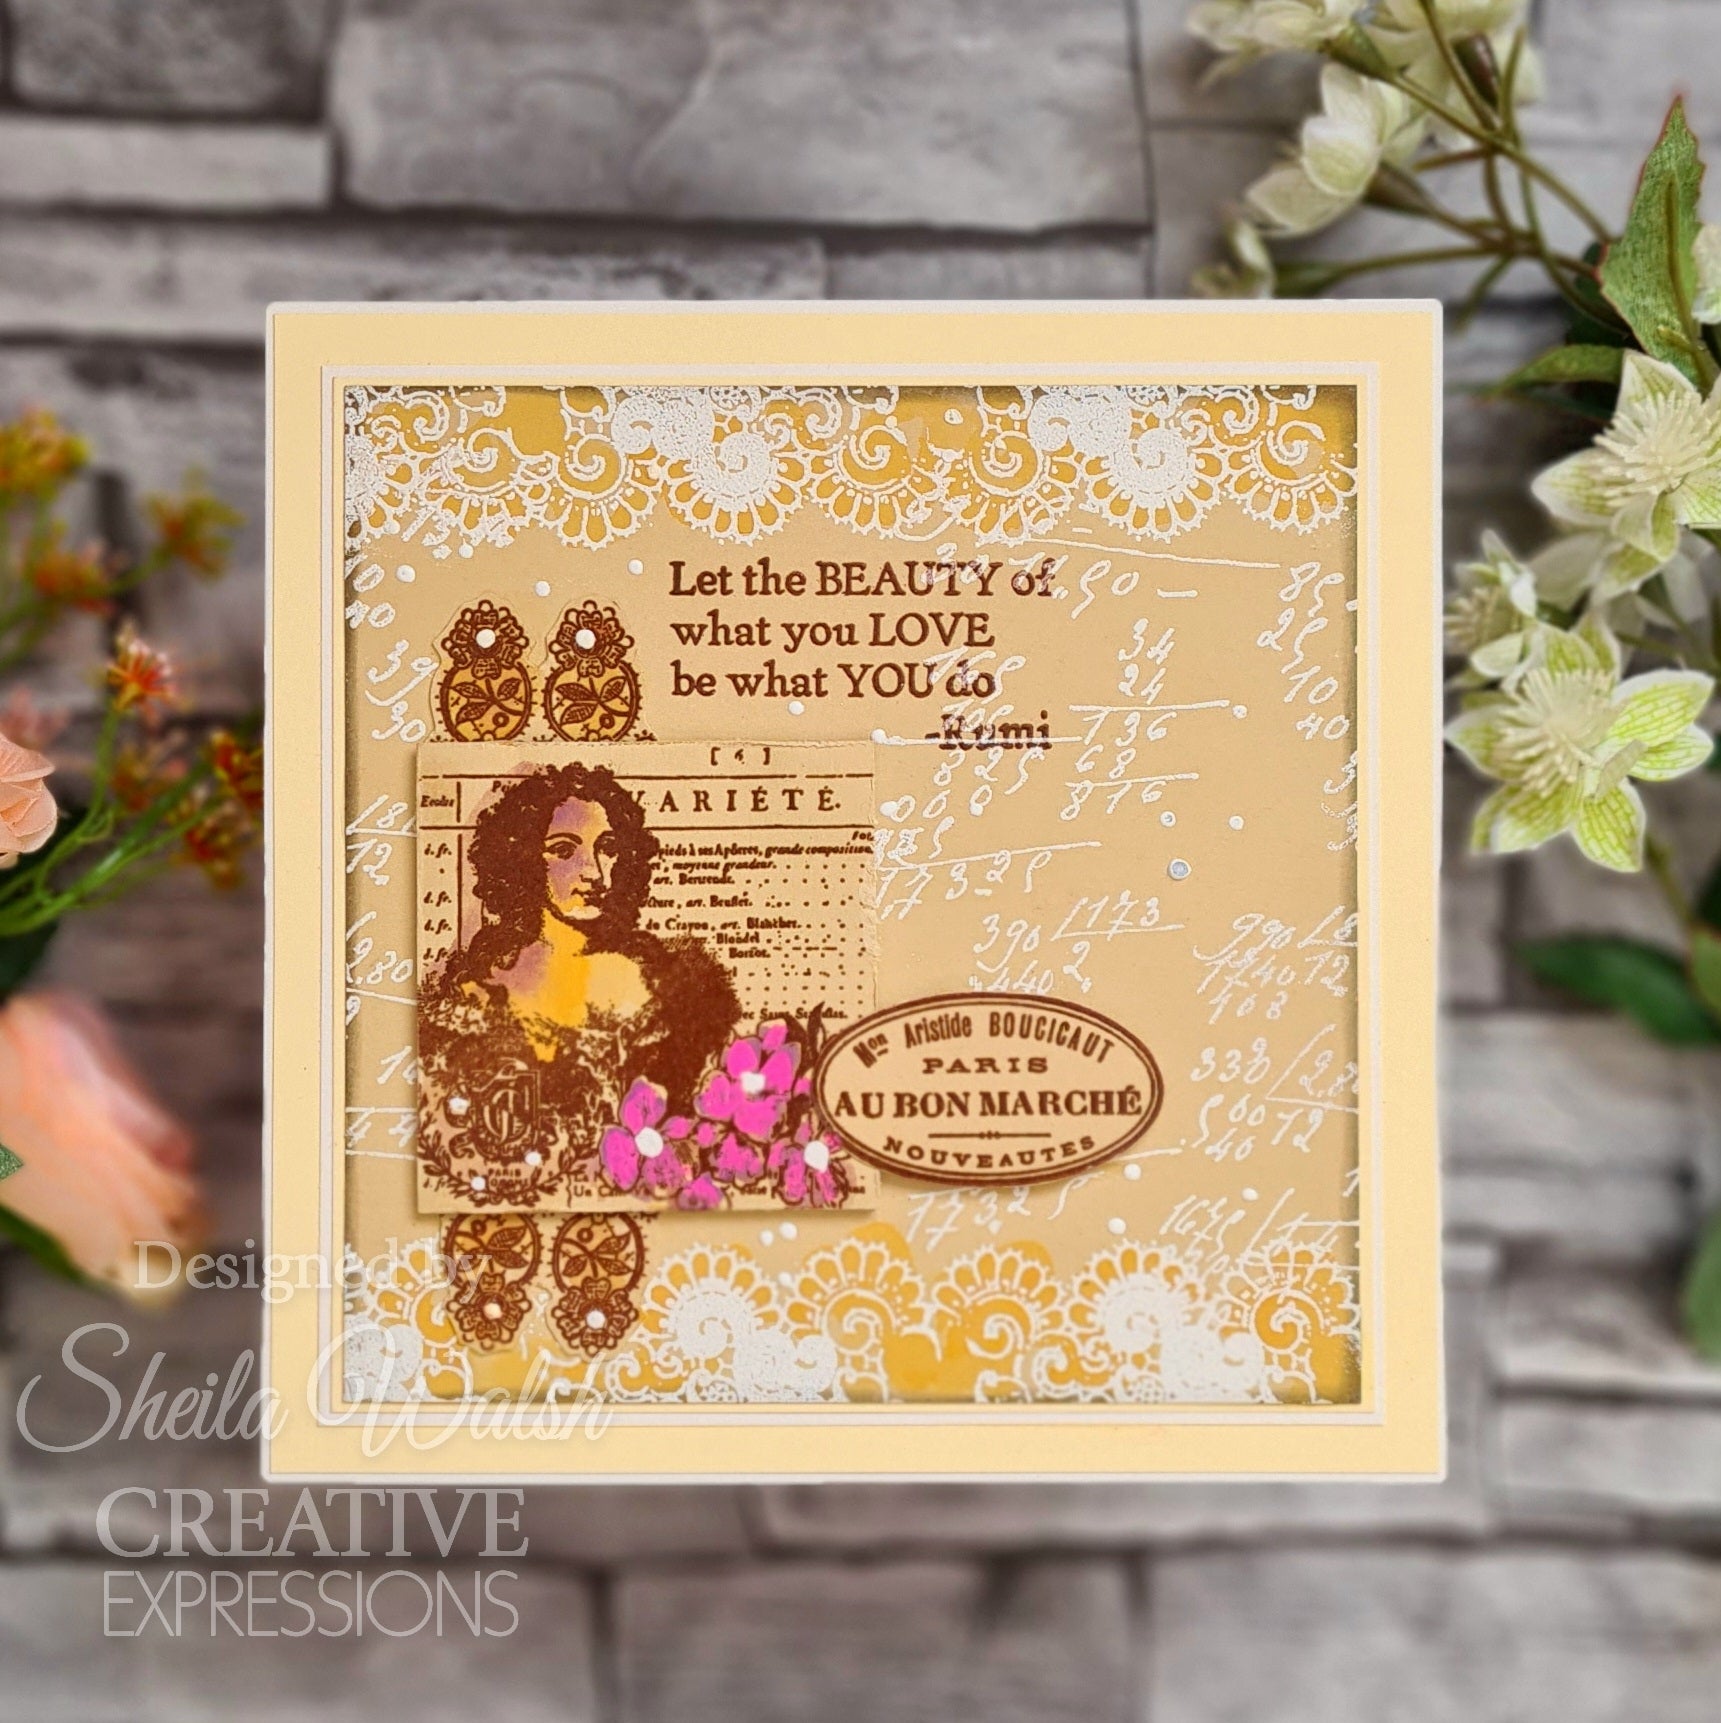 Creative Expressions Sam Poole Parisian Lace 6 in x 8 in Clear Stamp Set